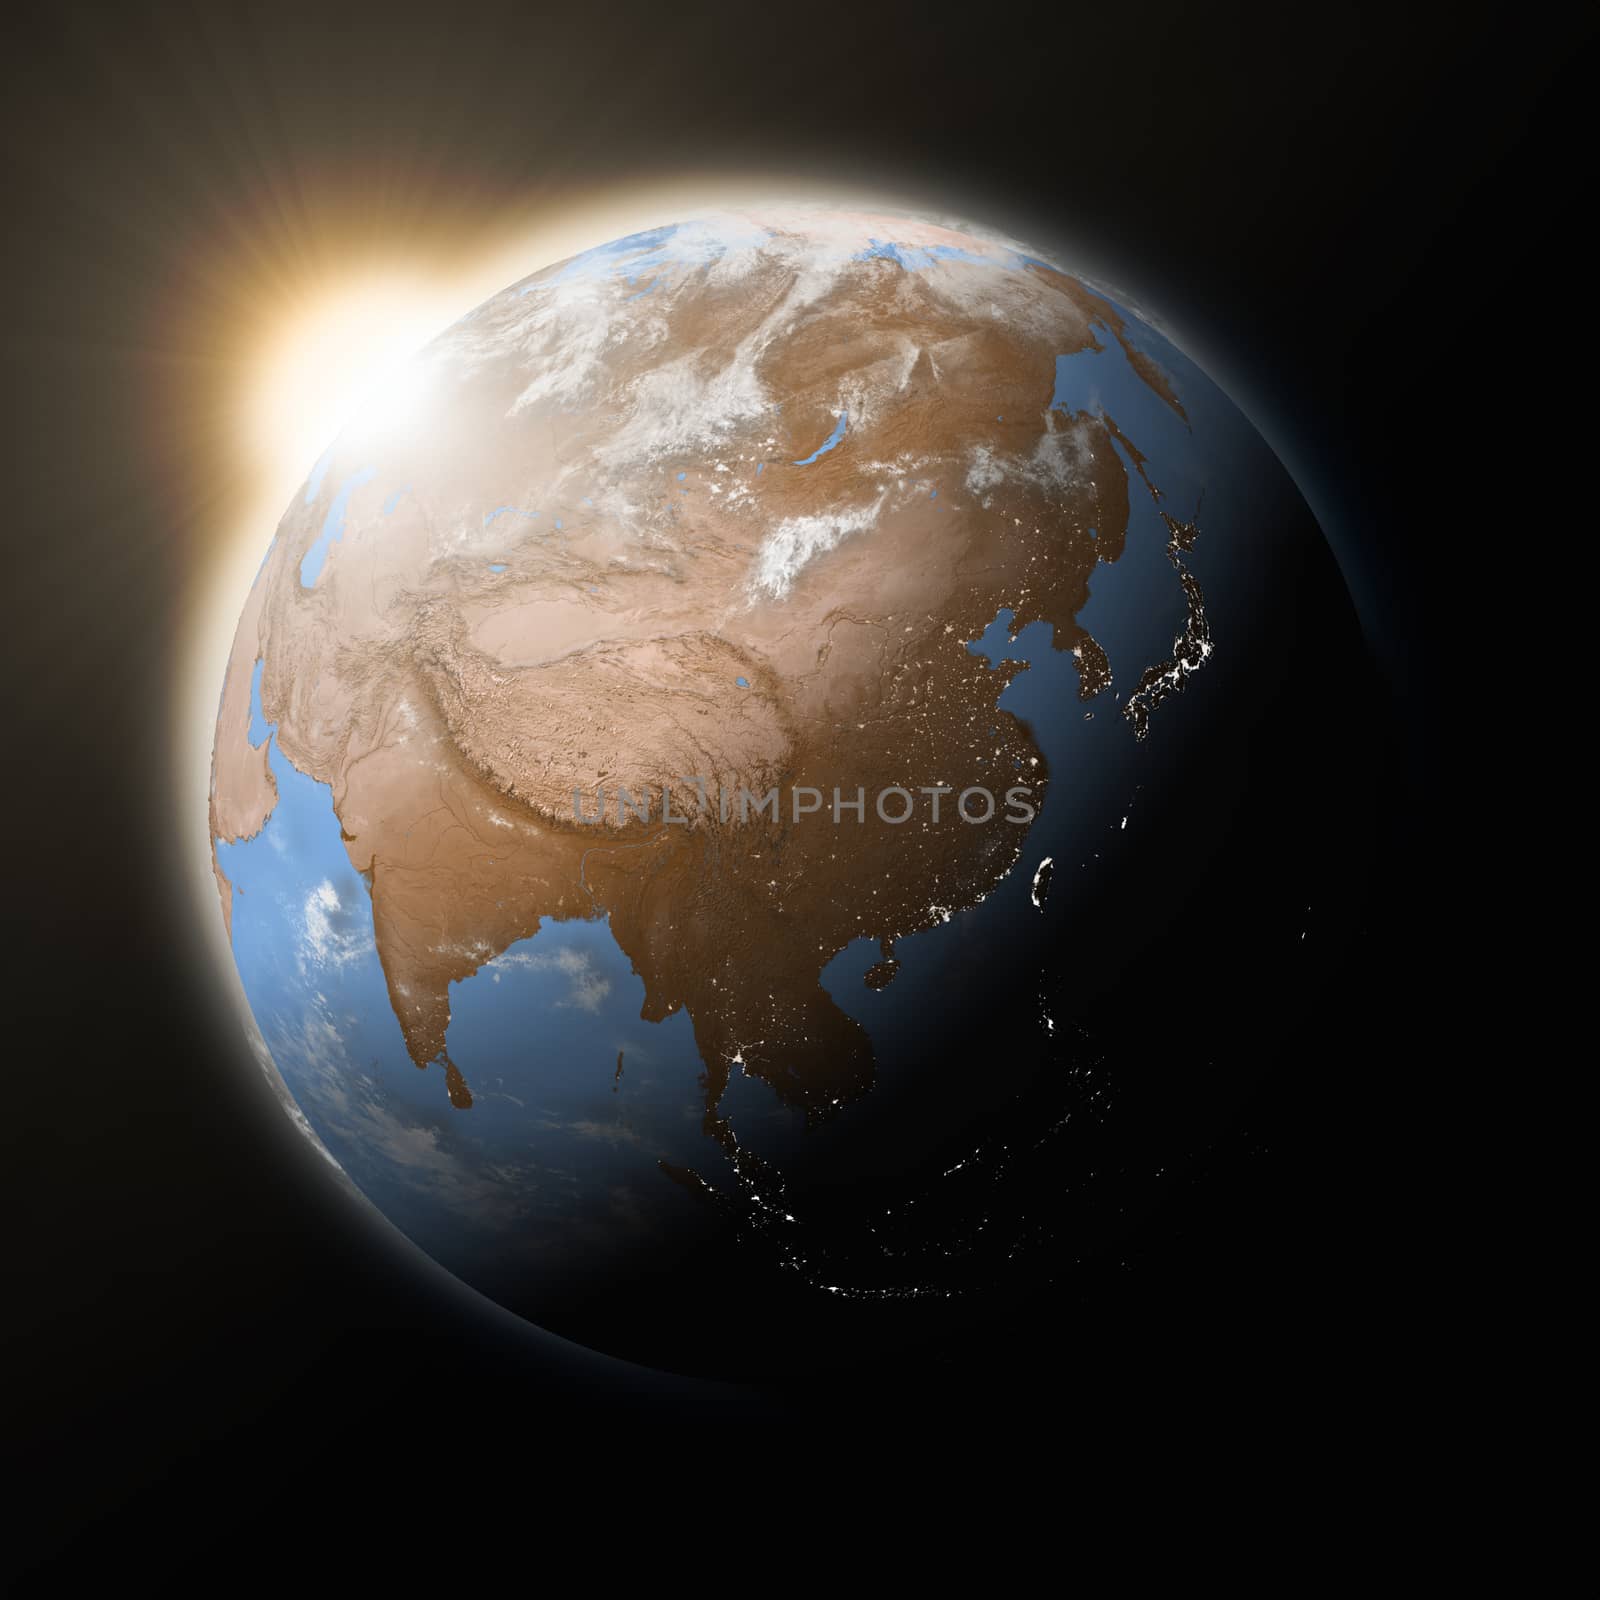 Sun over Southeast Asia on blue planet Earth isolated on black background. Highly detailed planet surface. Elements of this image furnished by NASA.